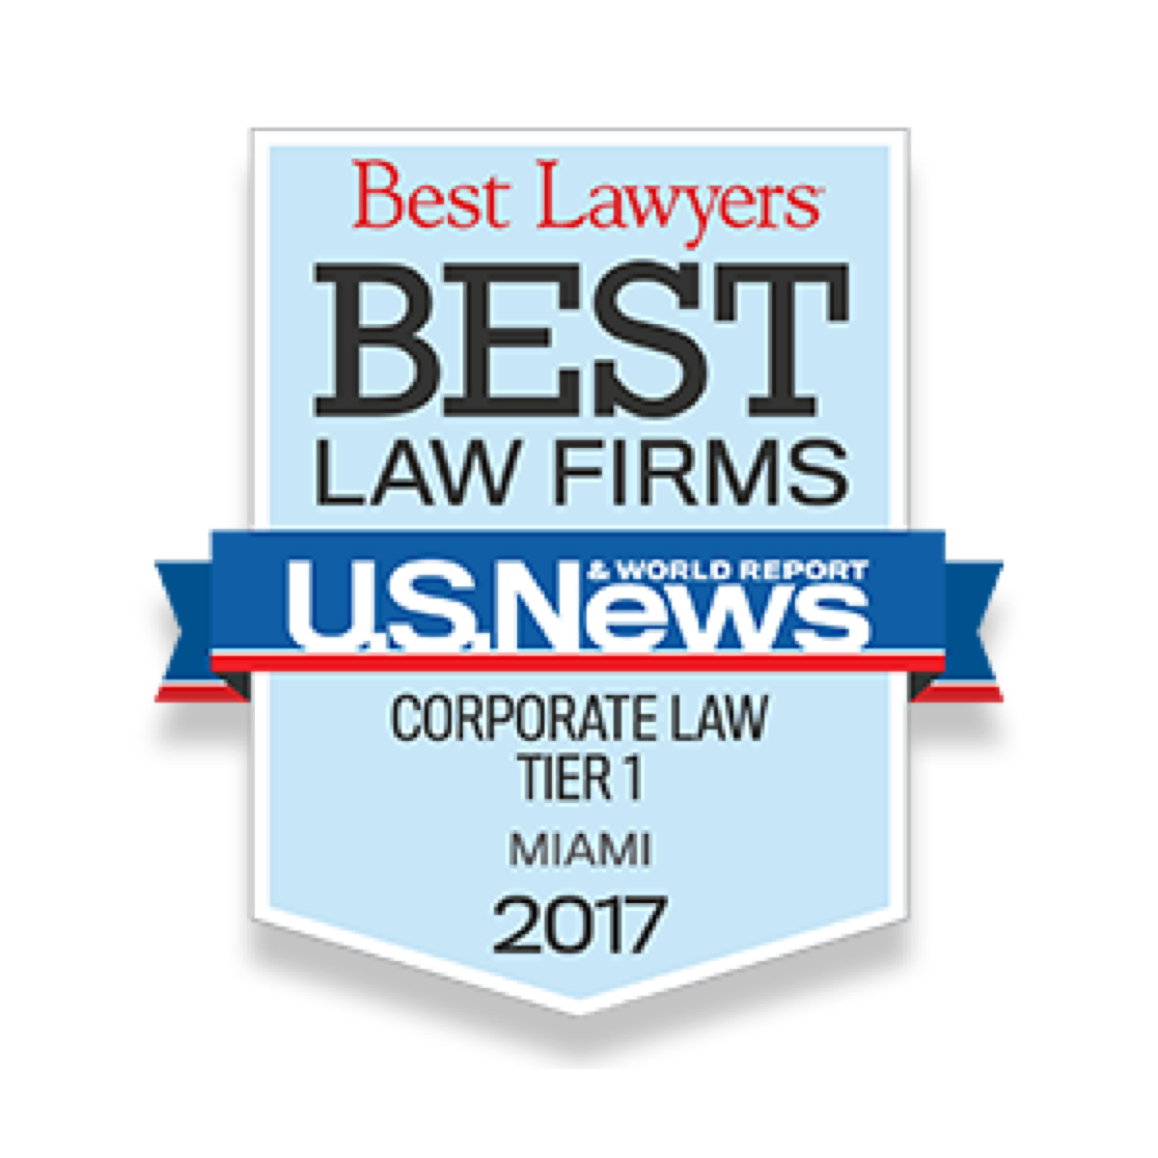 BEST LAWYERS
BEST LAW FIRMs. CORPORATE LAW TIER 1 MIAMI 2017